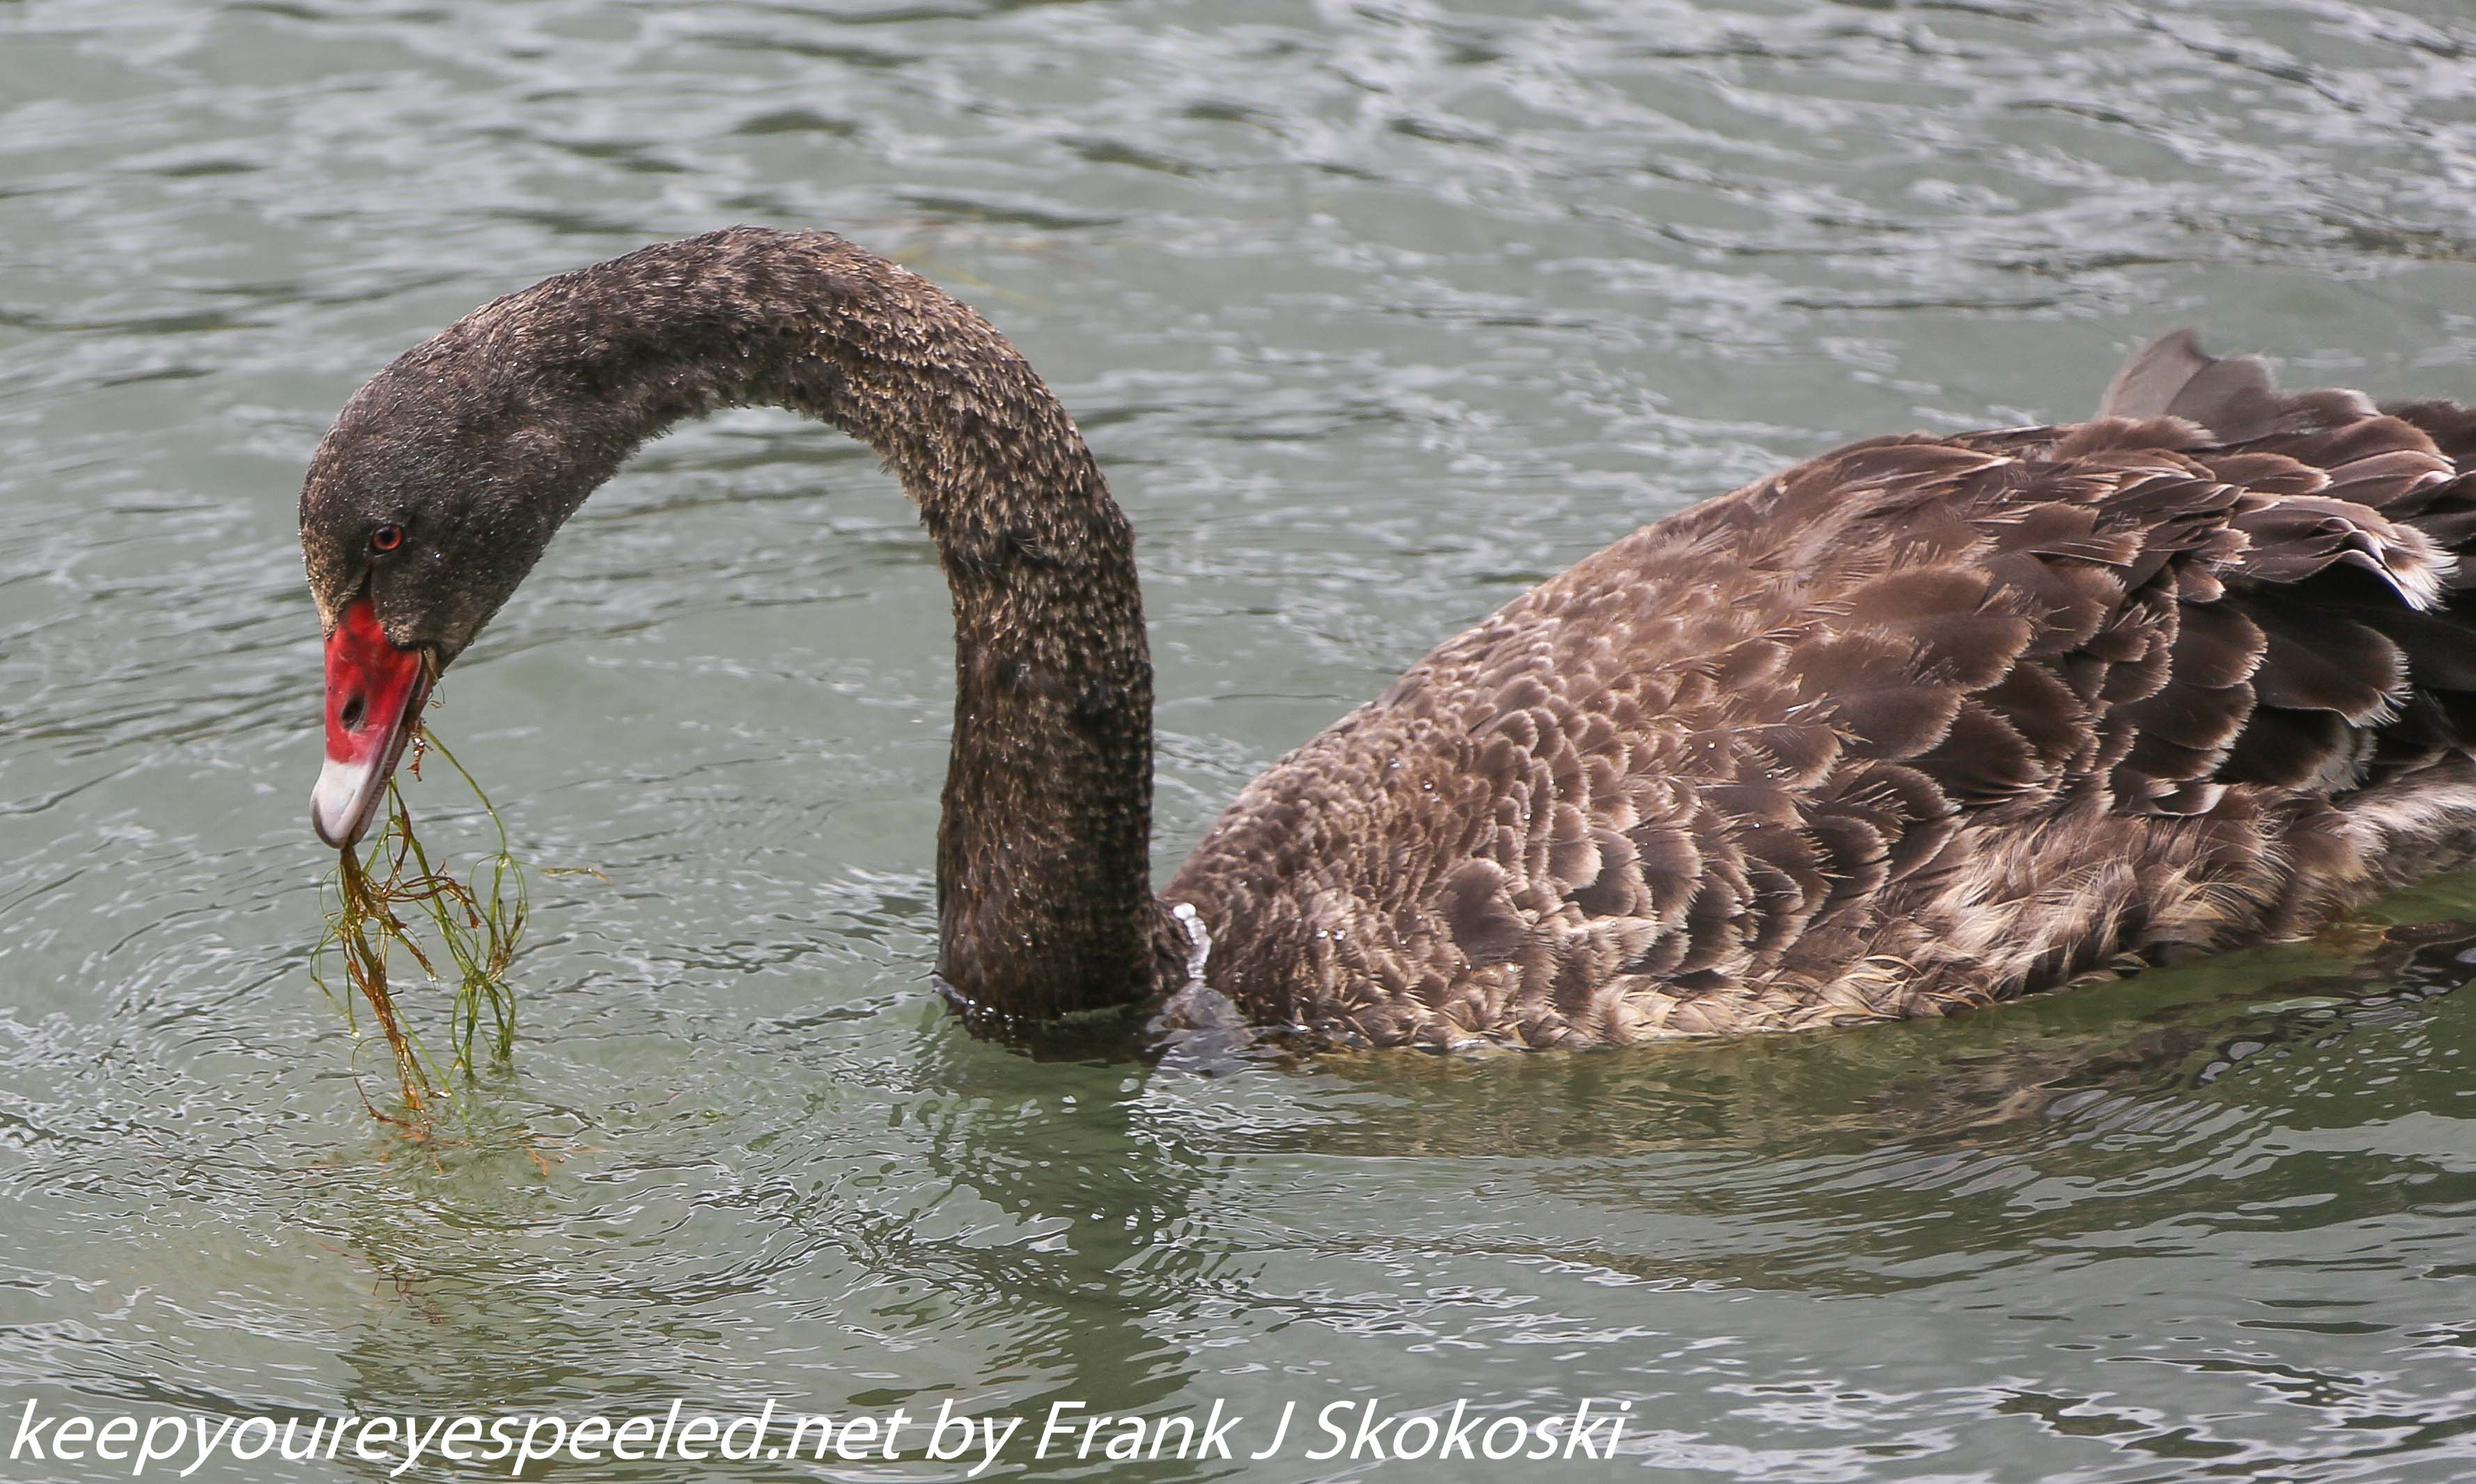 New-Zealand-Day-Seven-Glenorchy-black-swan-9-of-12